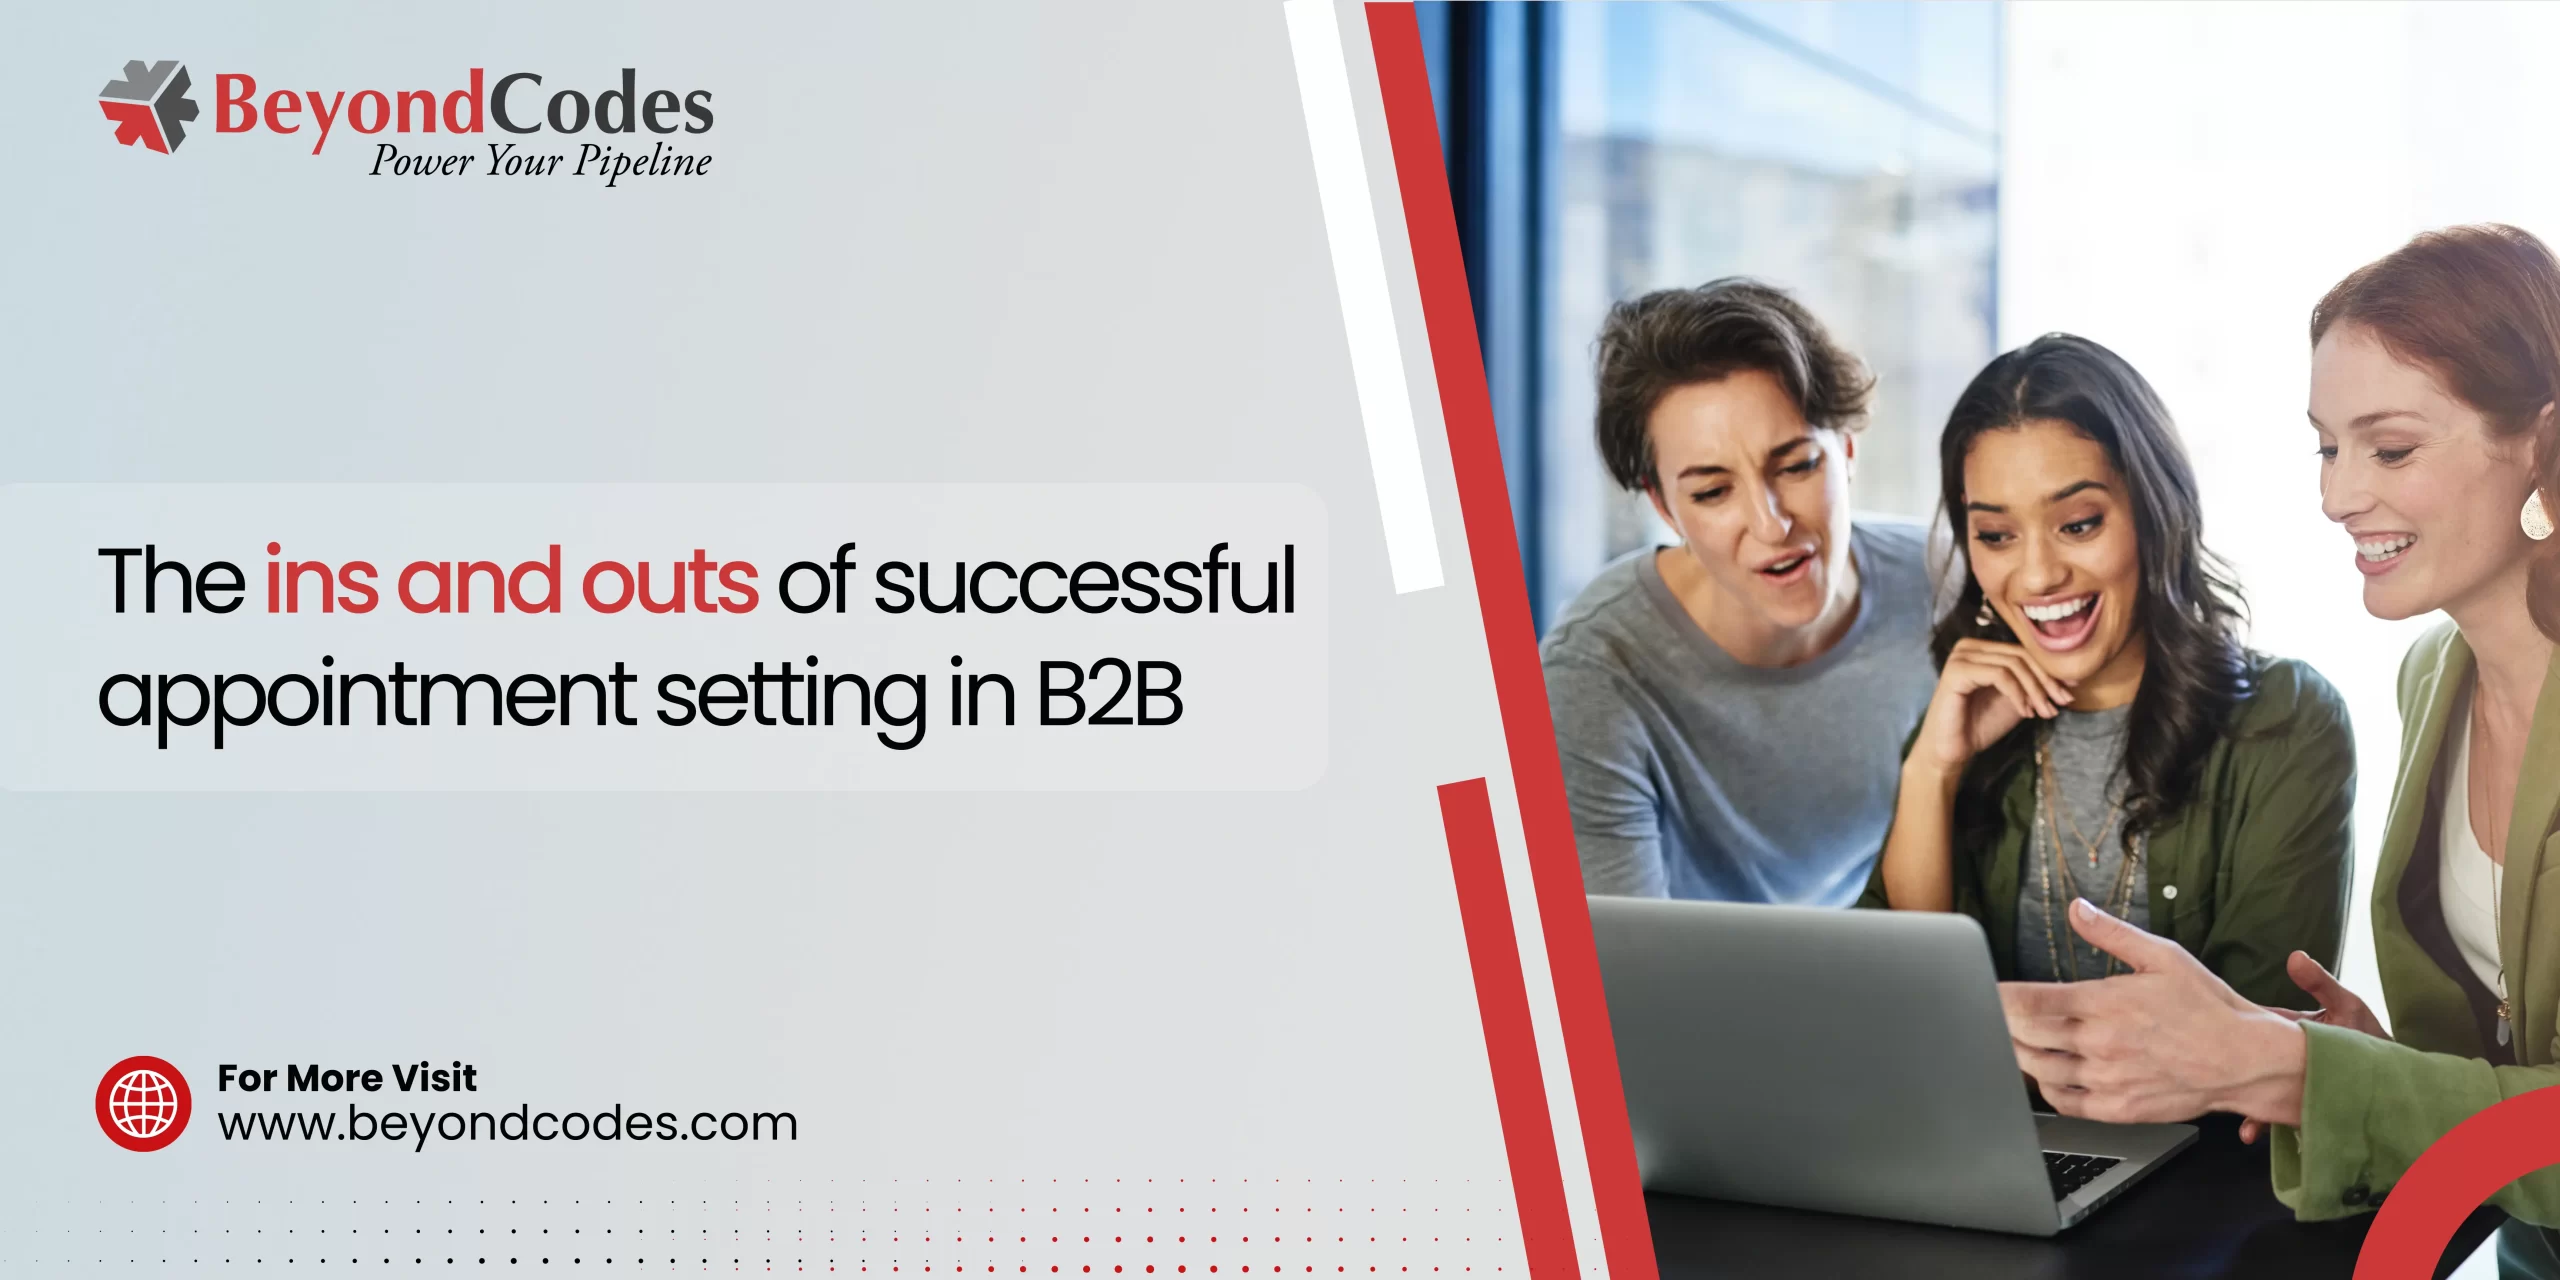 The ins and outs of successful appointment setting in B2B